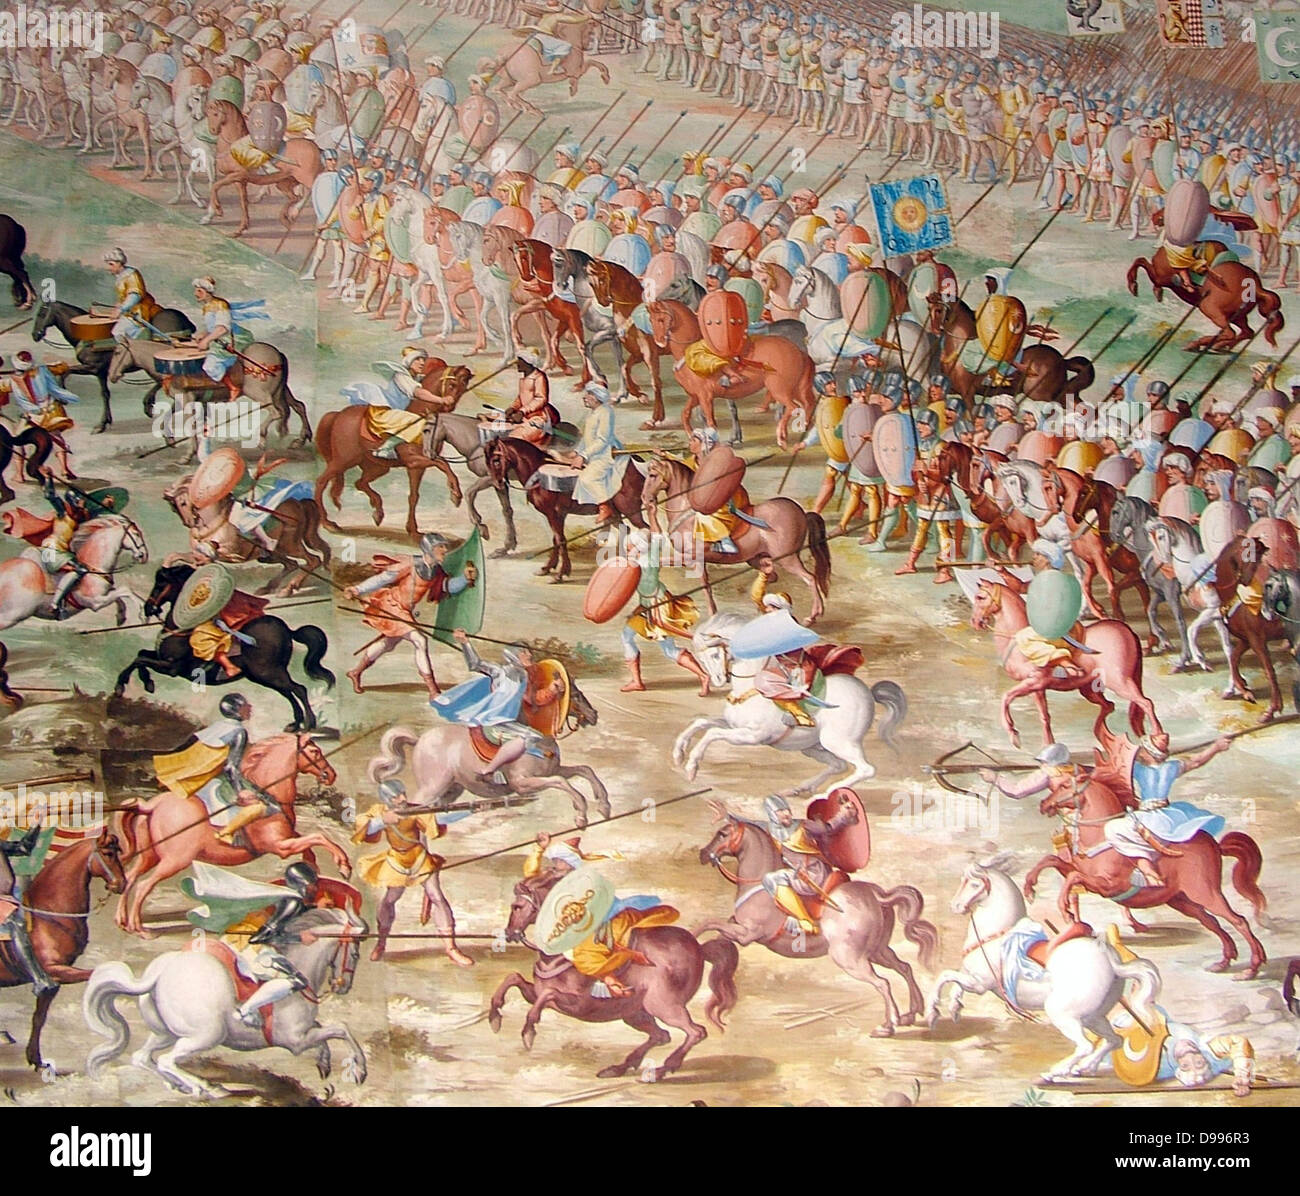 Army of Muhammed IX, (Nasrid Sultan of Granada), at the Battle of Higueruela 1431. Shown as part of a series of fresco paintings by Fabrizio Castello, Orazio Cambiaso and Lazzaro Tavarone. Displayed in the Gallery of Battles, at the Royal Monastery of San Lorenzo de El Escorial, Spain. Stock Photo